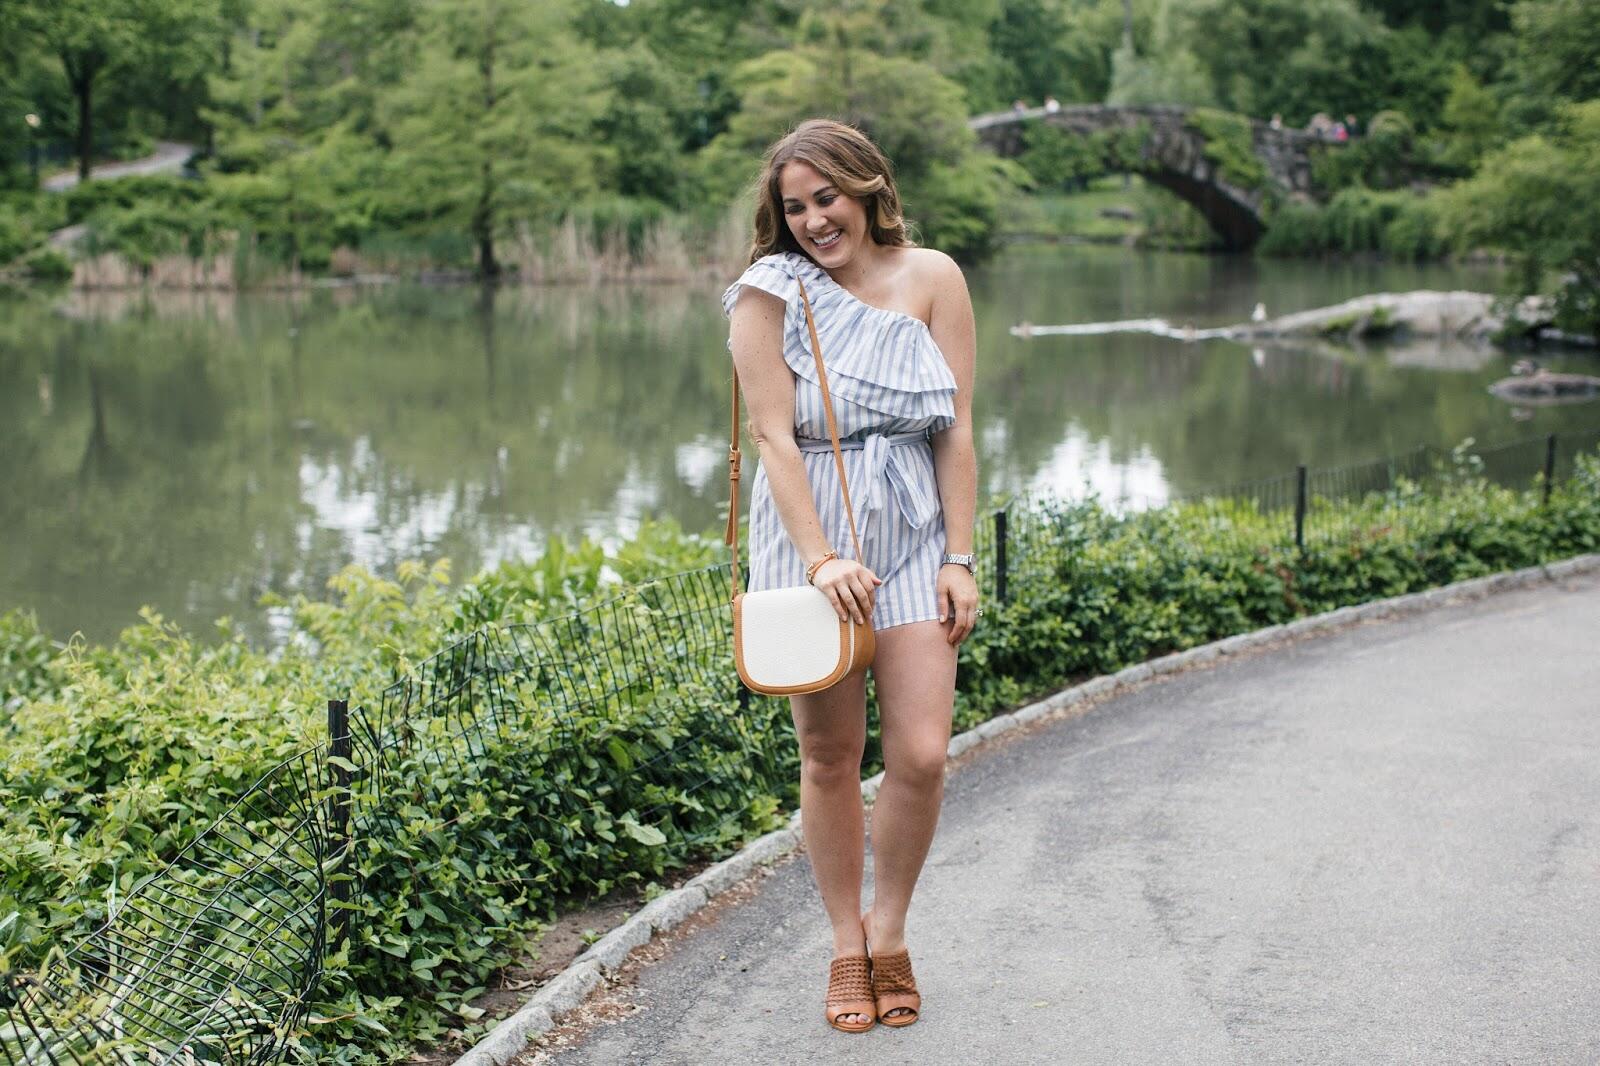 How to Shop for Designer Jewelry for Less by fashion blogger Laura of Walking in Memphis in High Heels